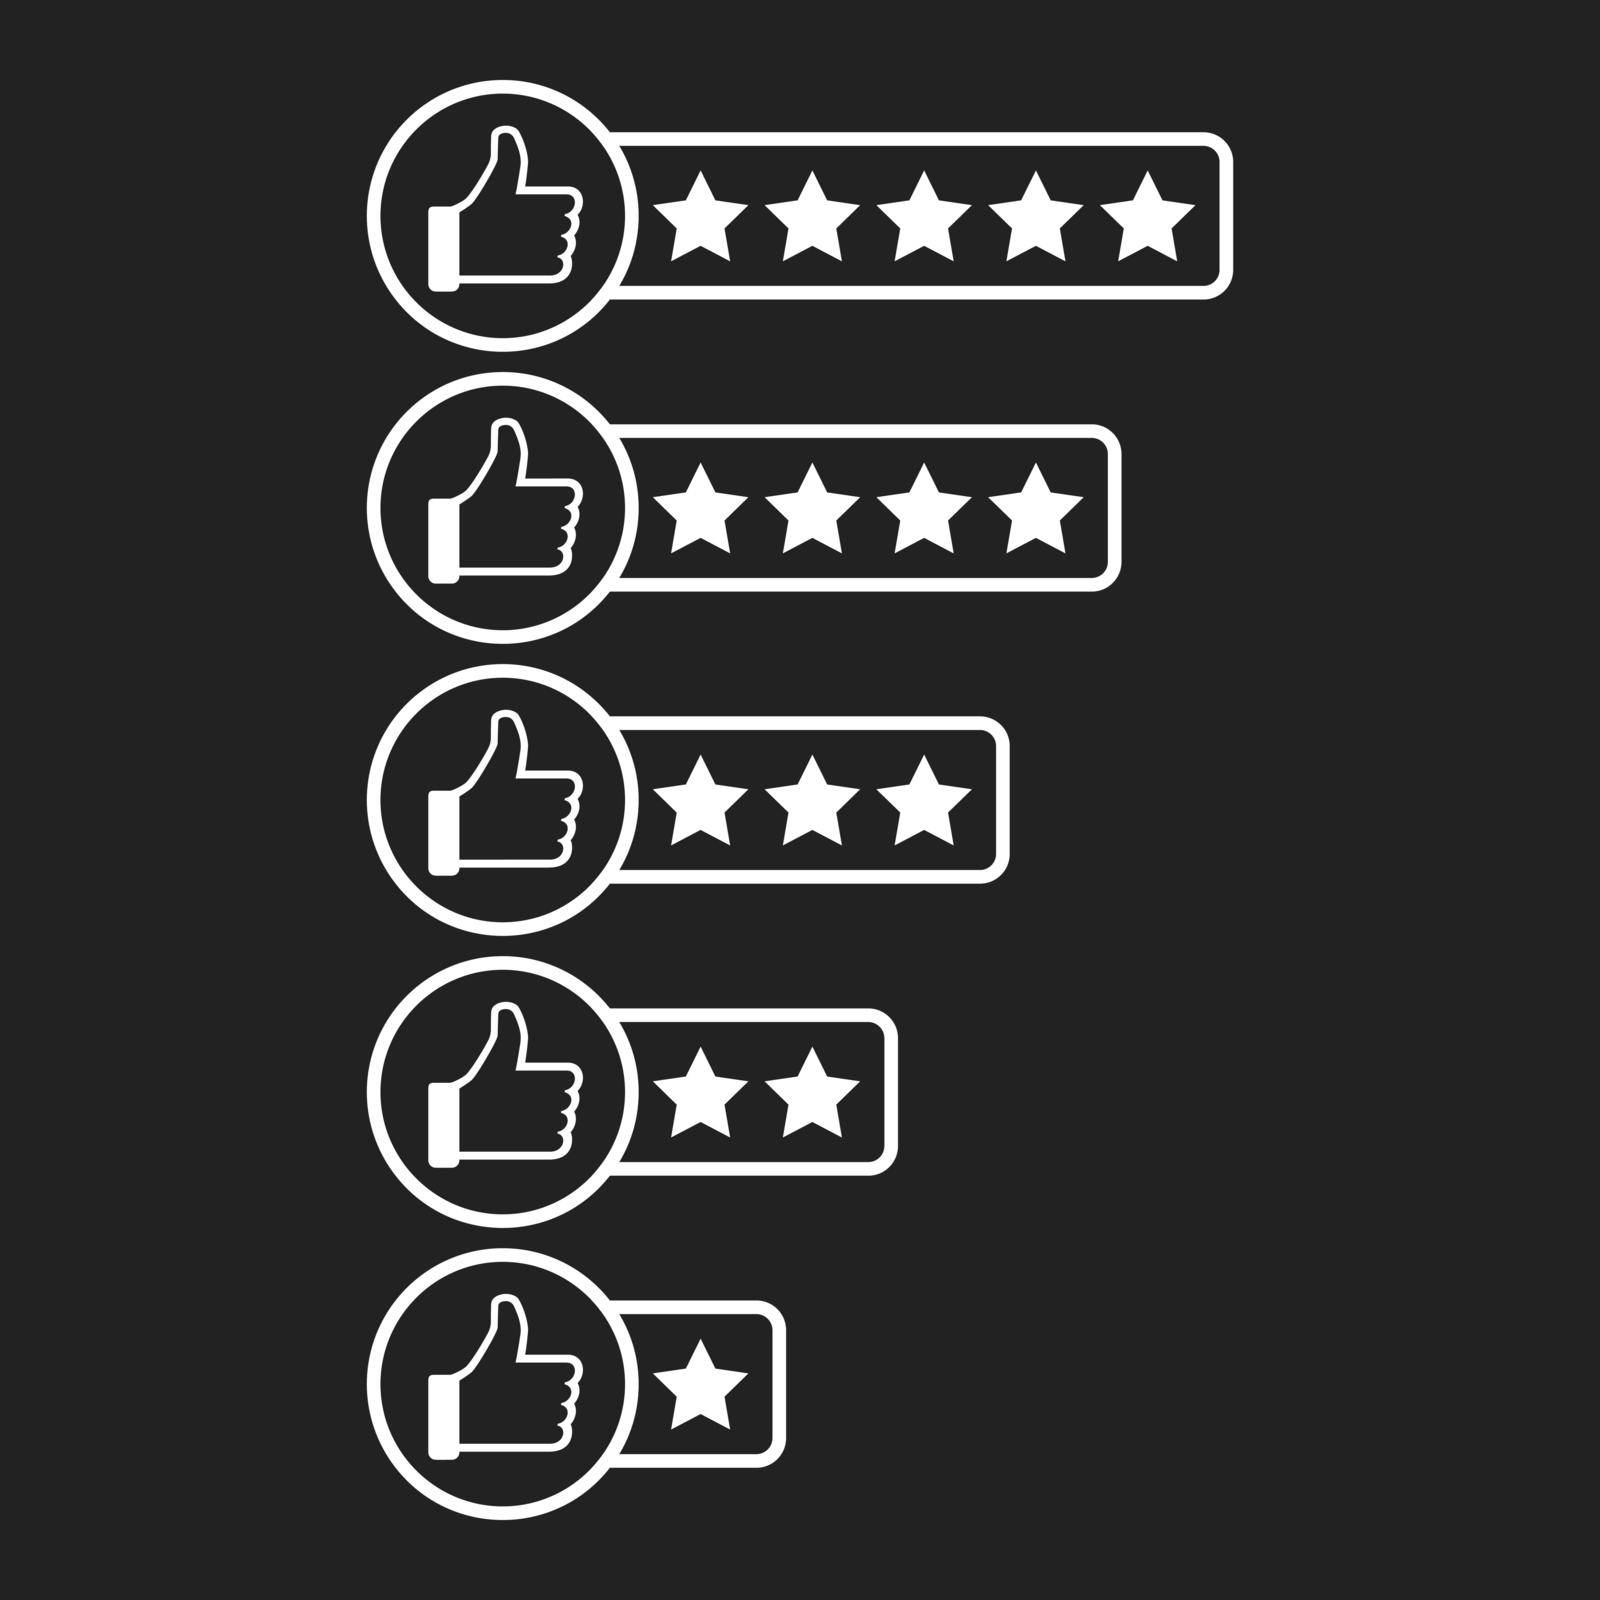 Customer review icon. Thumb up with stars rating vector illustration.